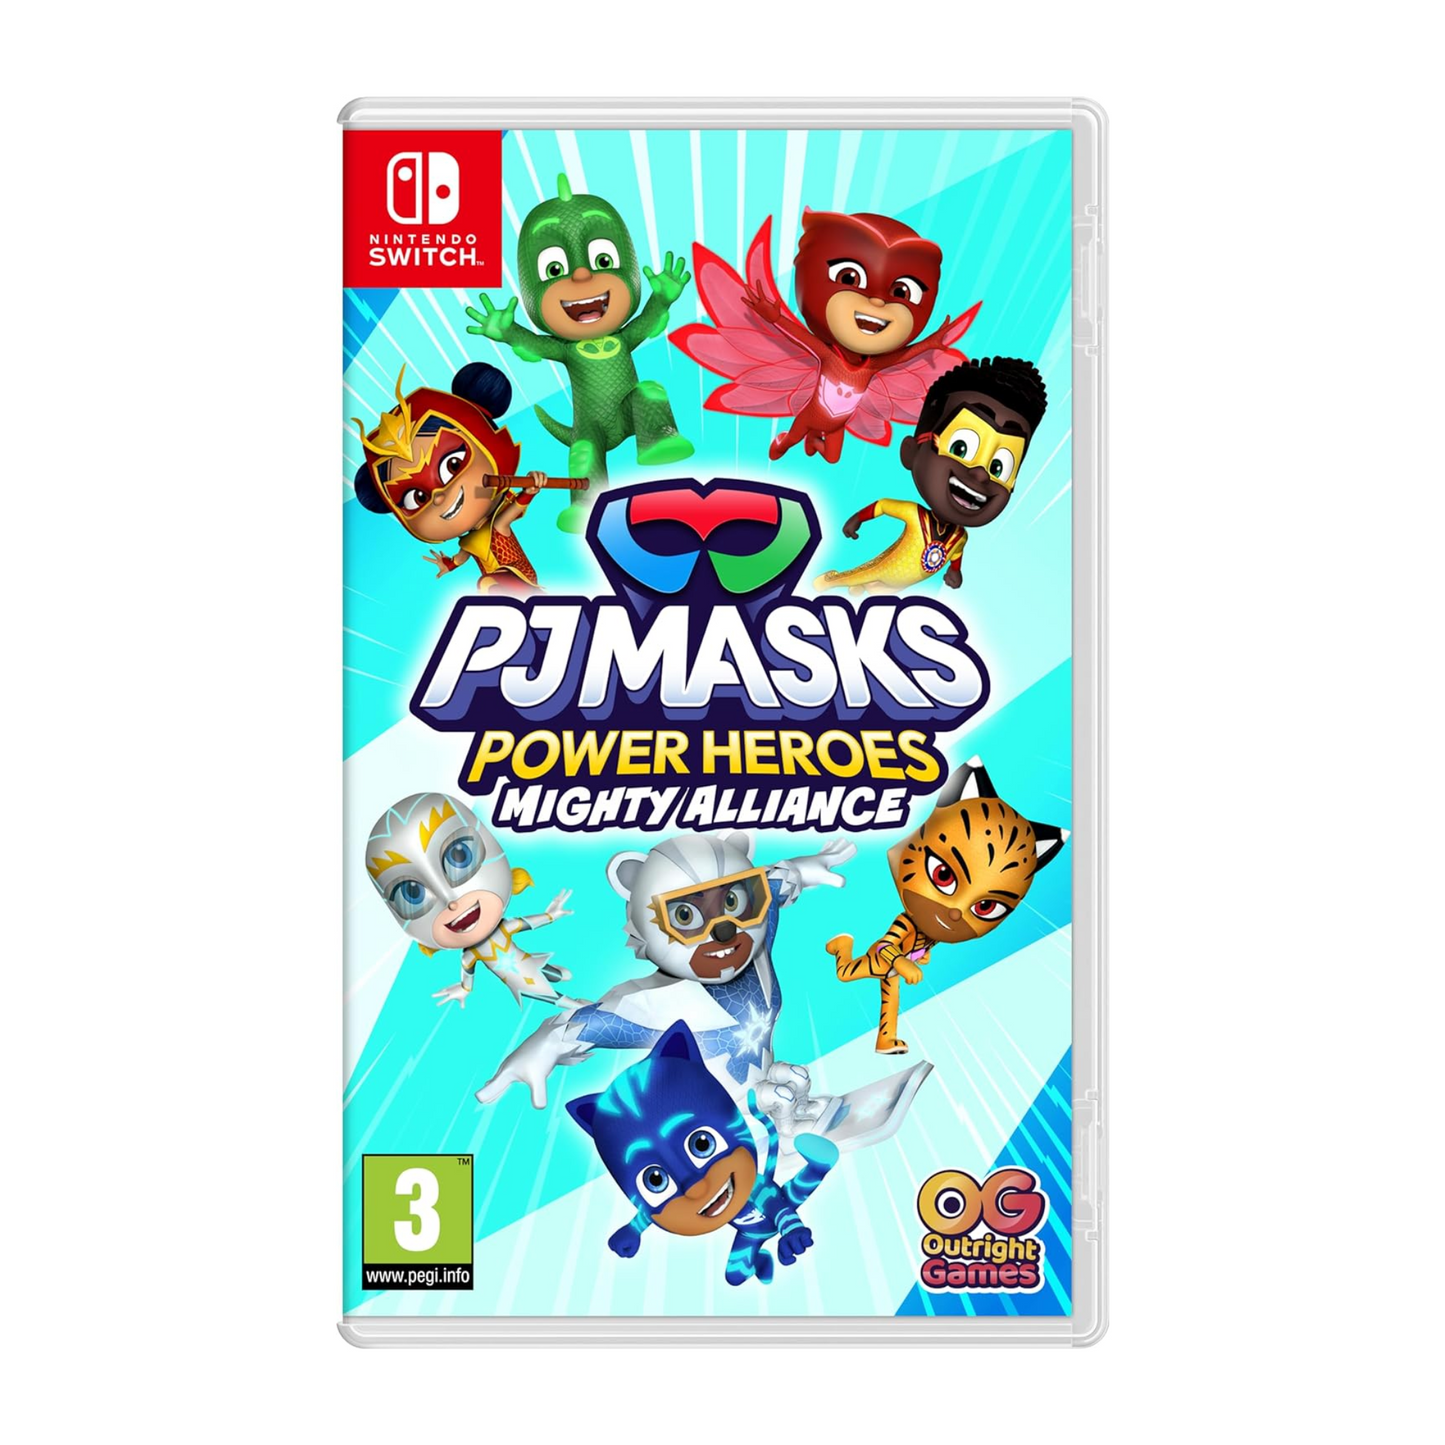 PJ masks power heroes: Mighty Alliance video game for Nintendo Switch